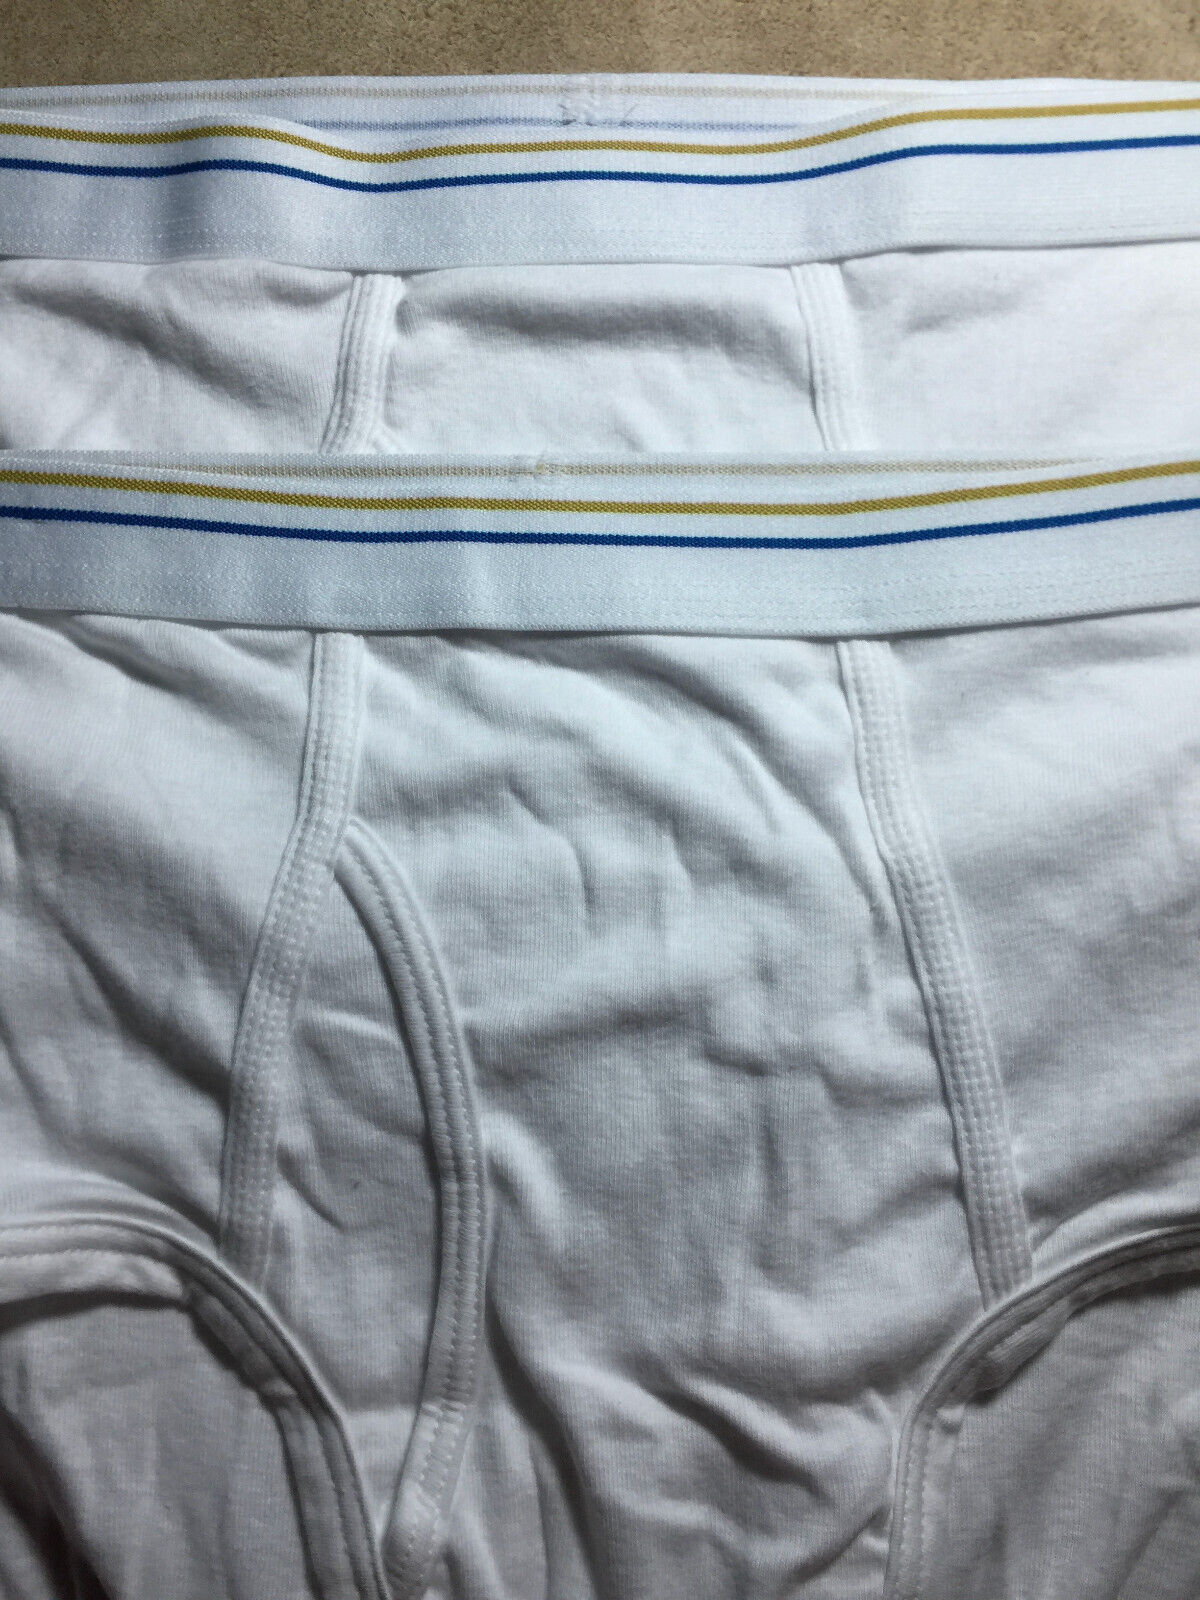 Two sz L 36-38 Stafford Men's 60/40 Cotton-Polyester Full Briefs ...